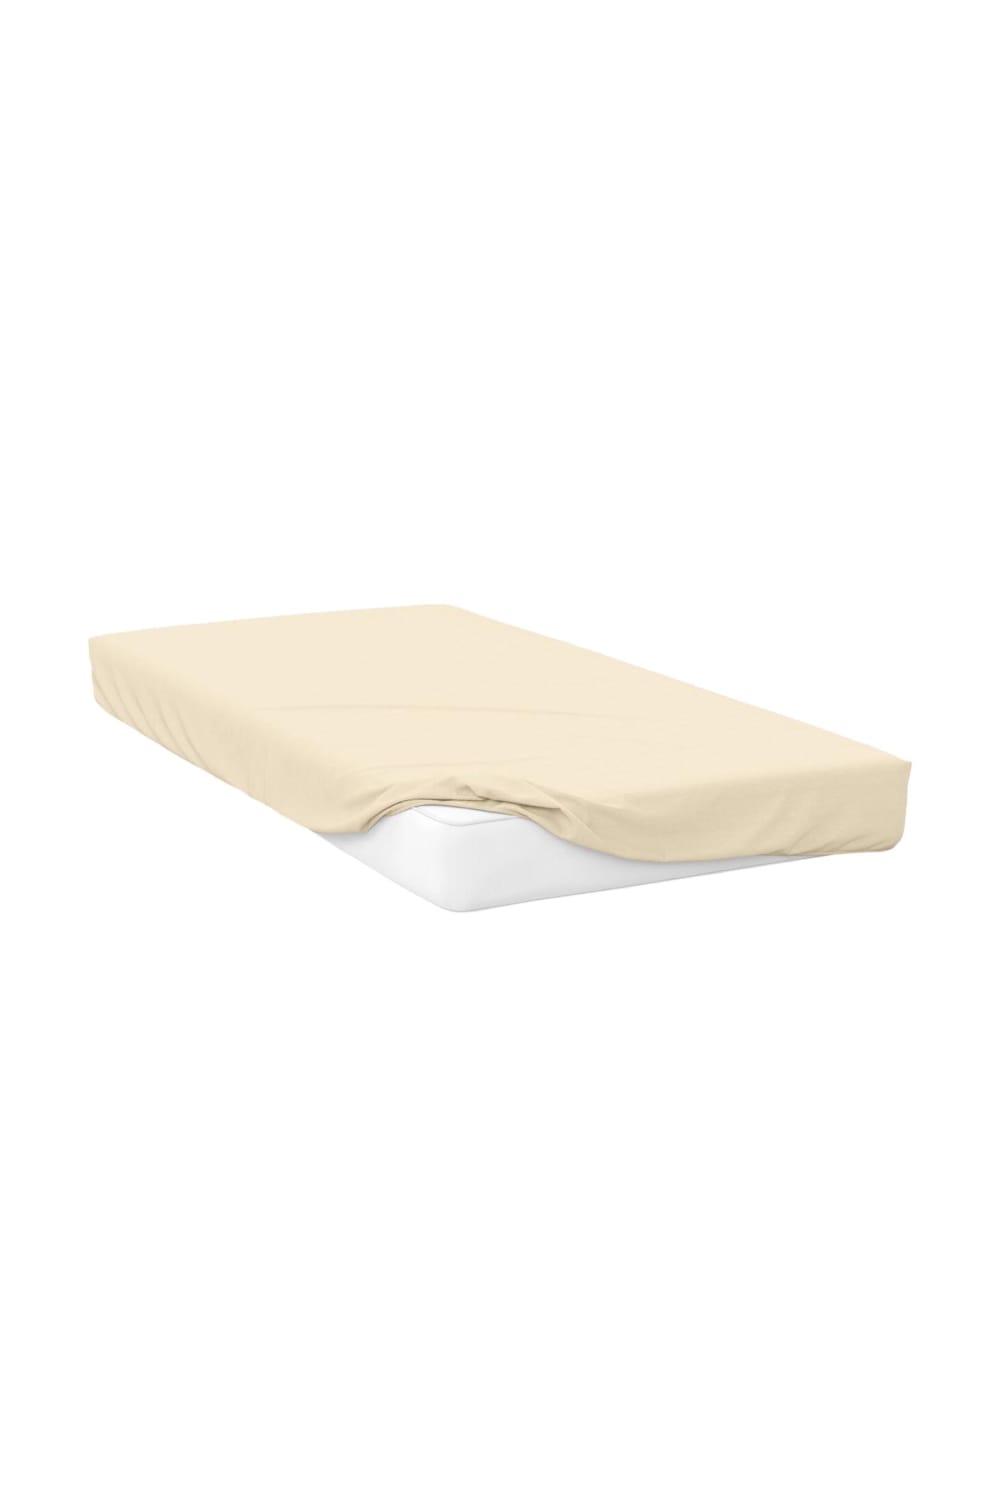 Belledorm Jersey Cotton Deep Fitted Sheet (Ivory) (Full) (UK - Double)